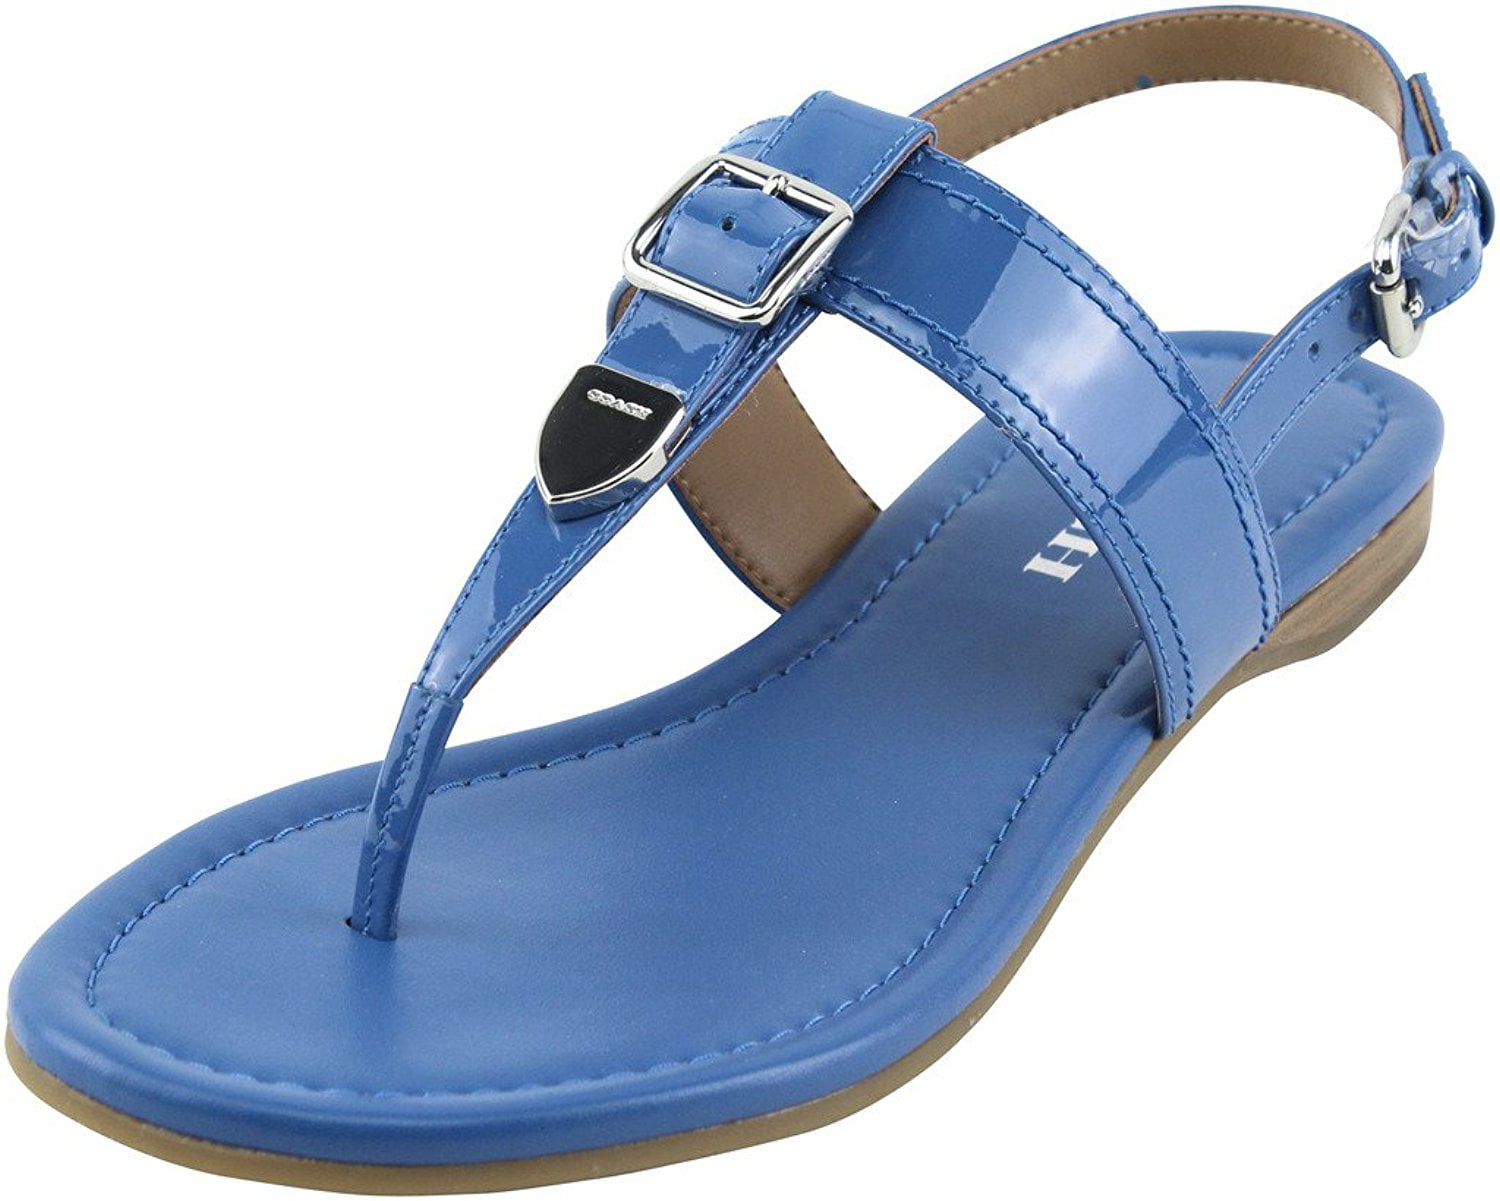 Coach - Coach Womens Cassidy Split Toe Casual Ankle Strap Sandals ...